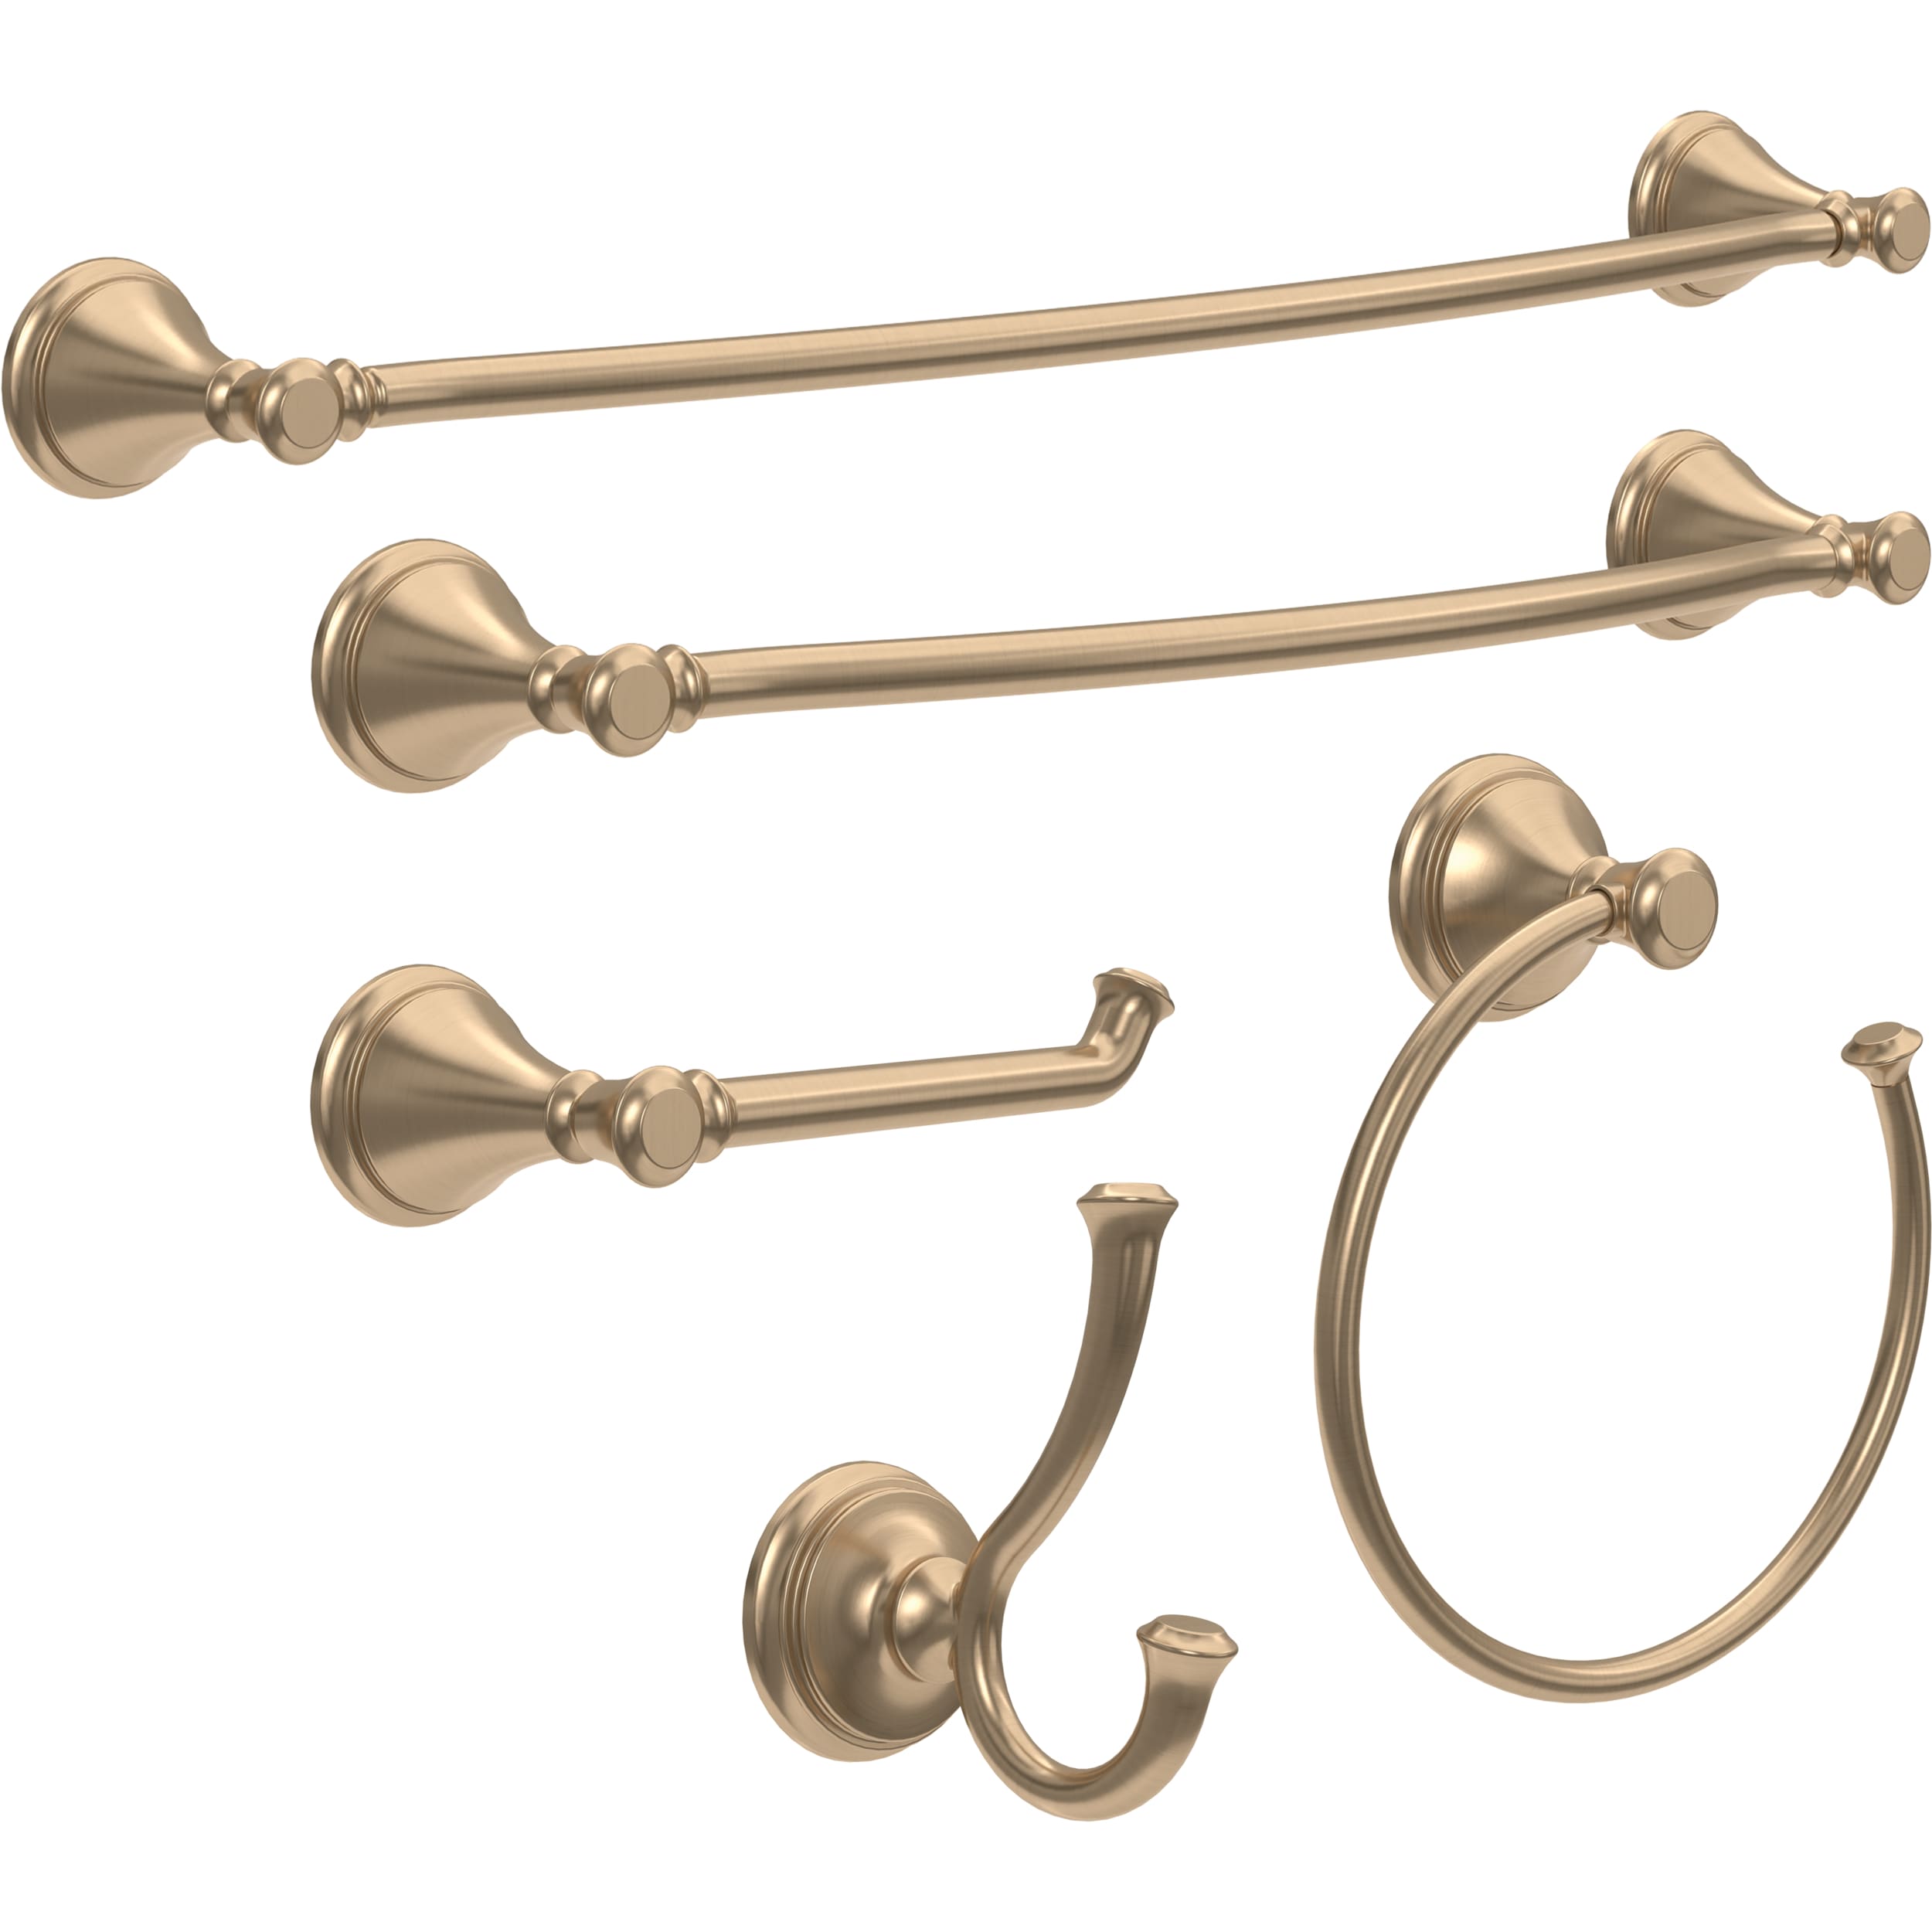 Delta Cassidy 18-in Champagne Bronze Wall Mount Single Towel Bar at 